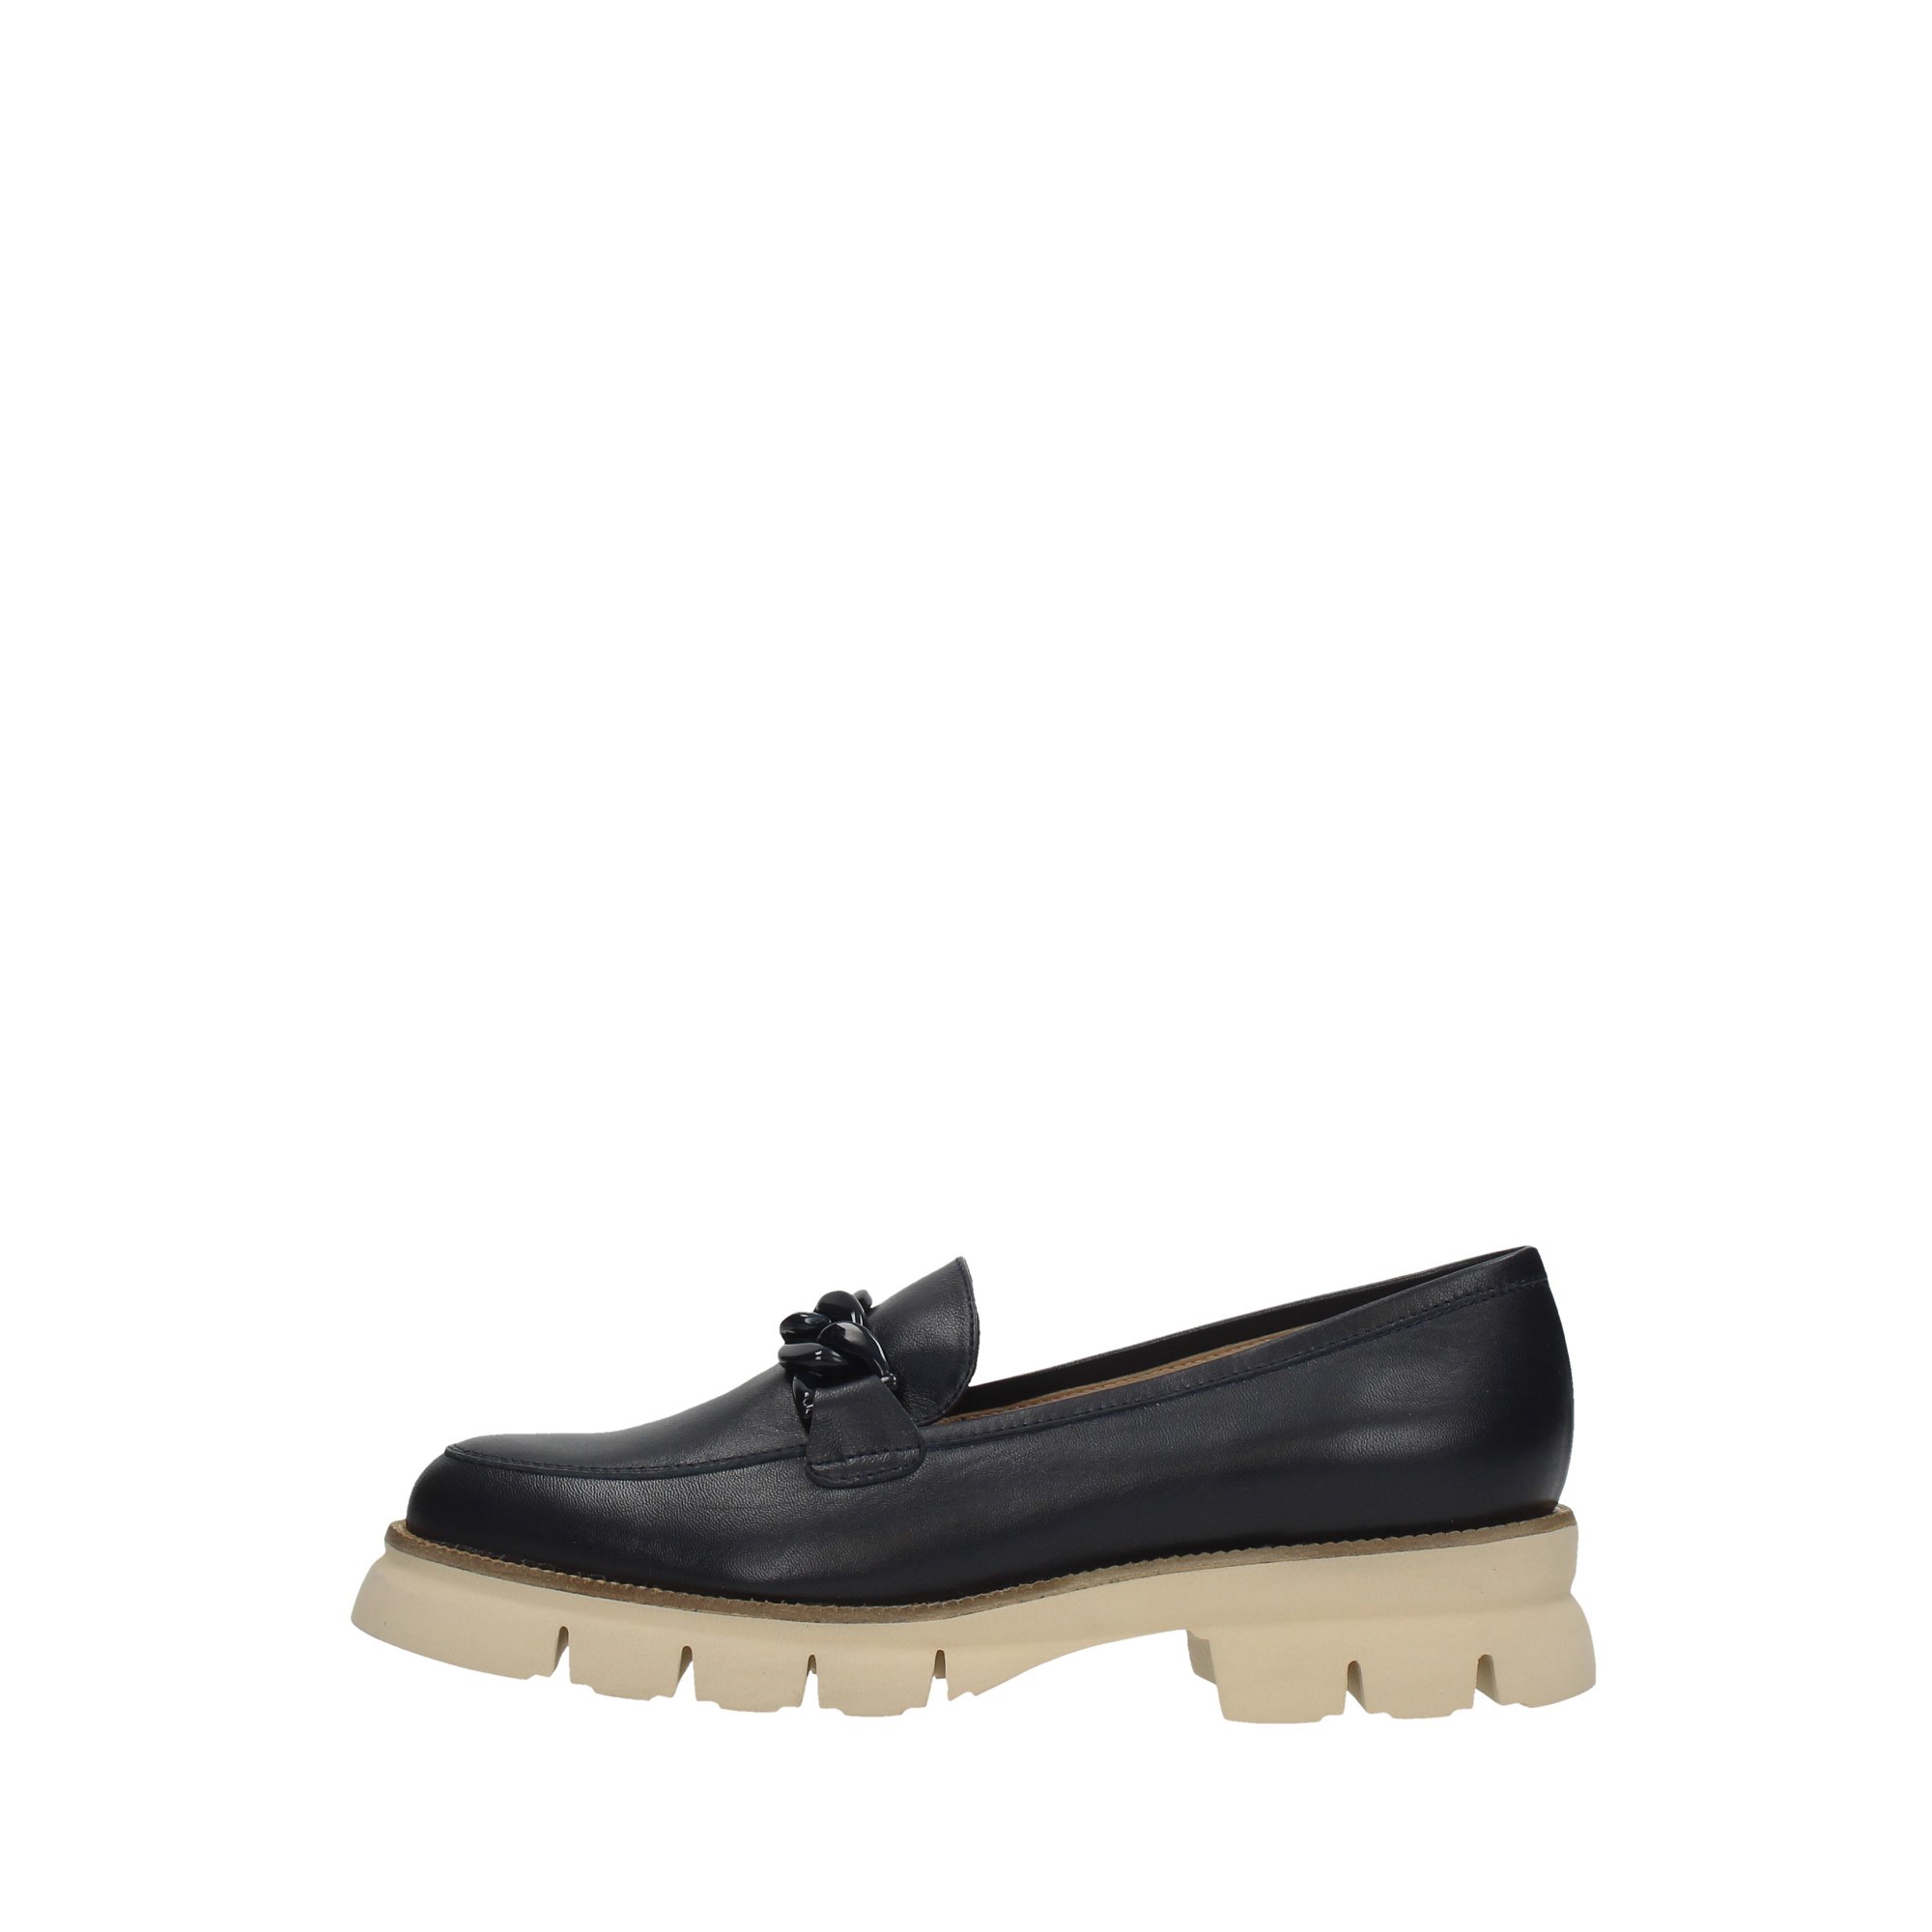 Luca Grossi Shoes Women Moccasins And Slippers F086M